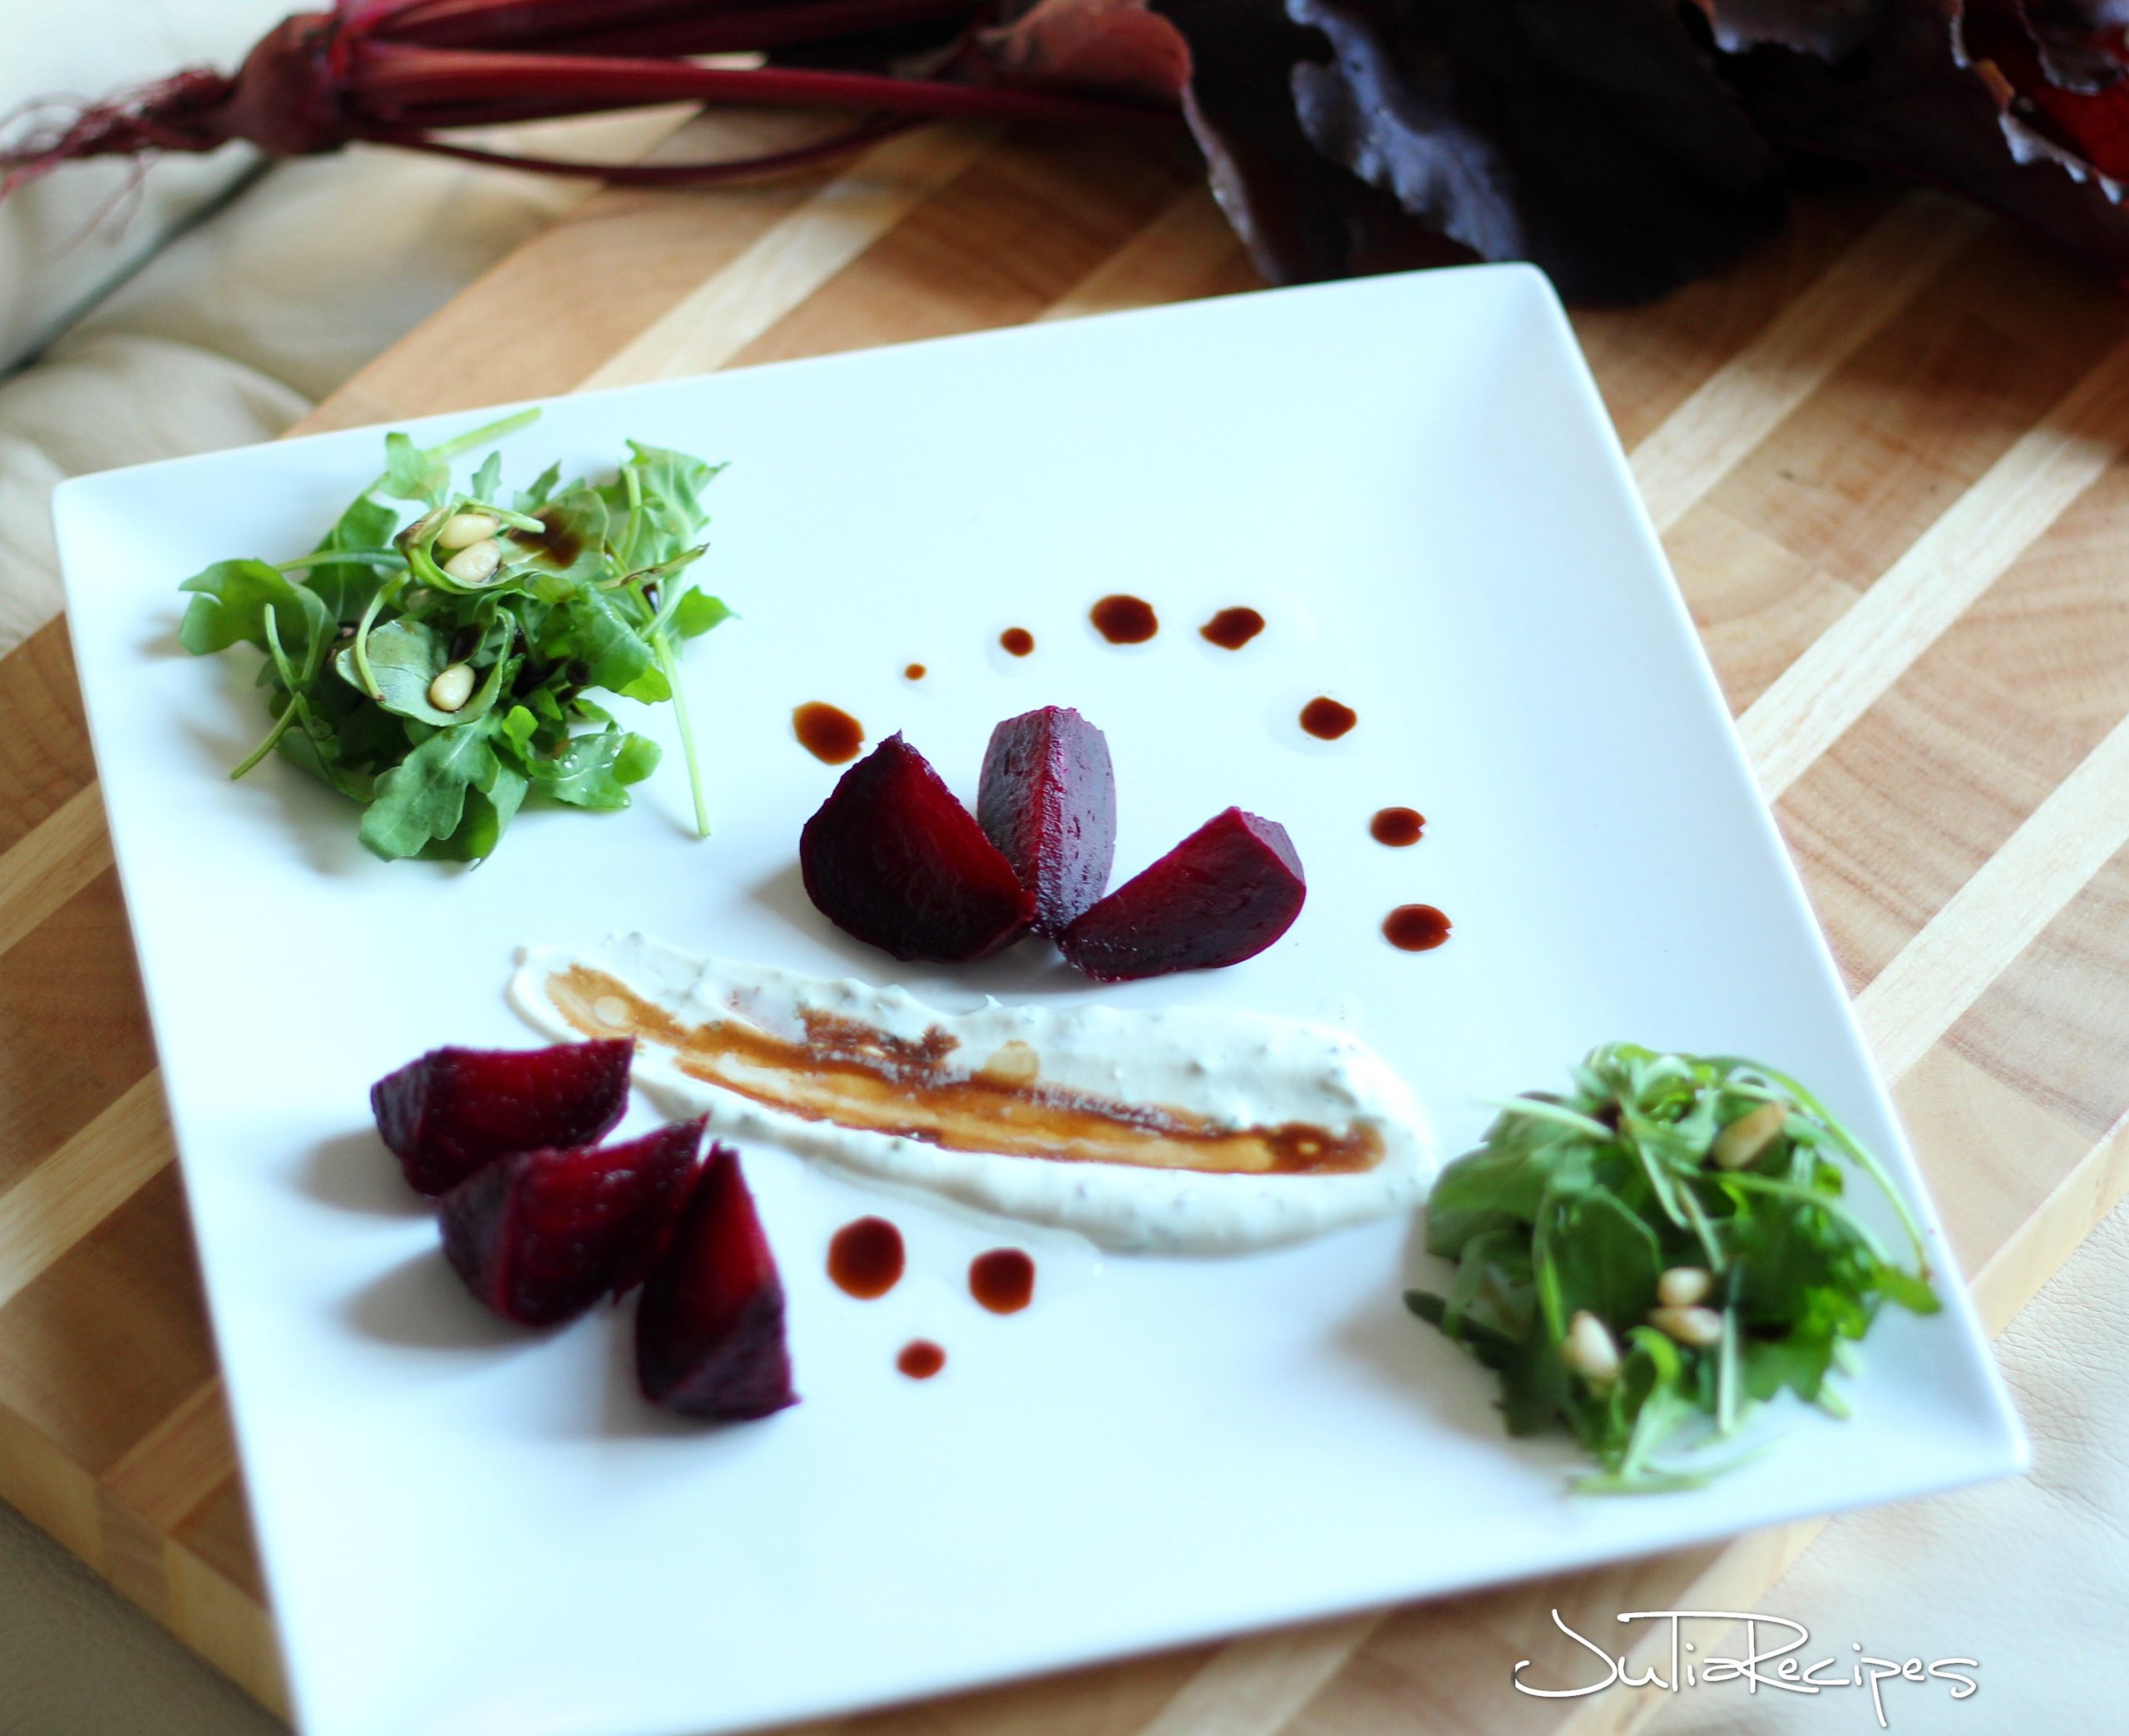 Beet salad with goat cheese decomposed